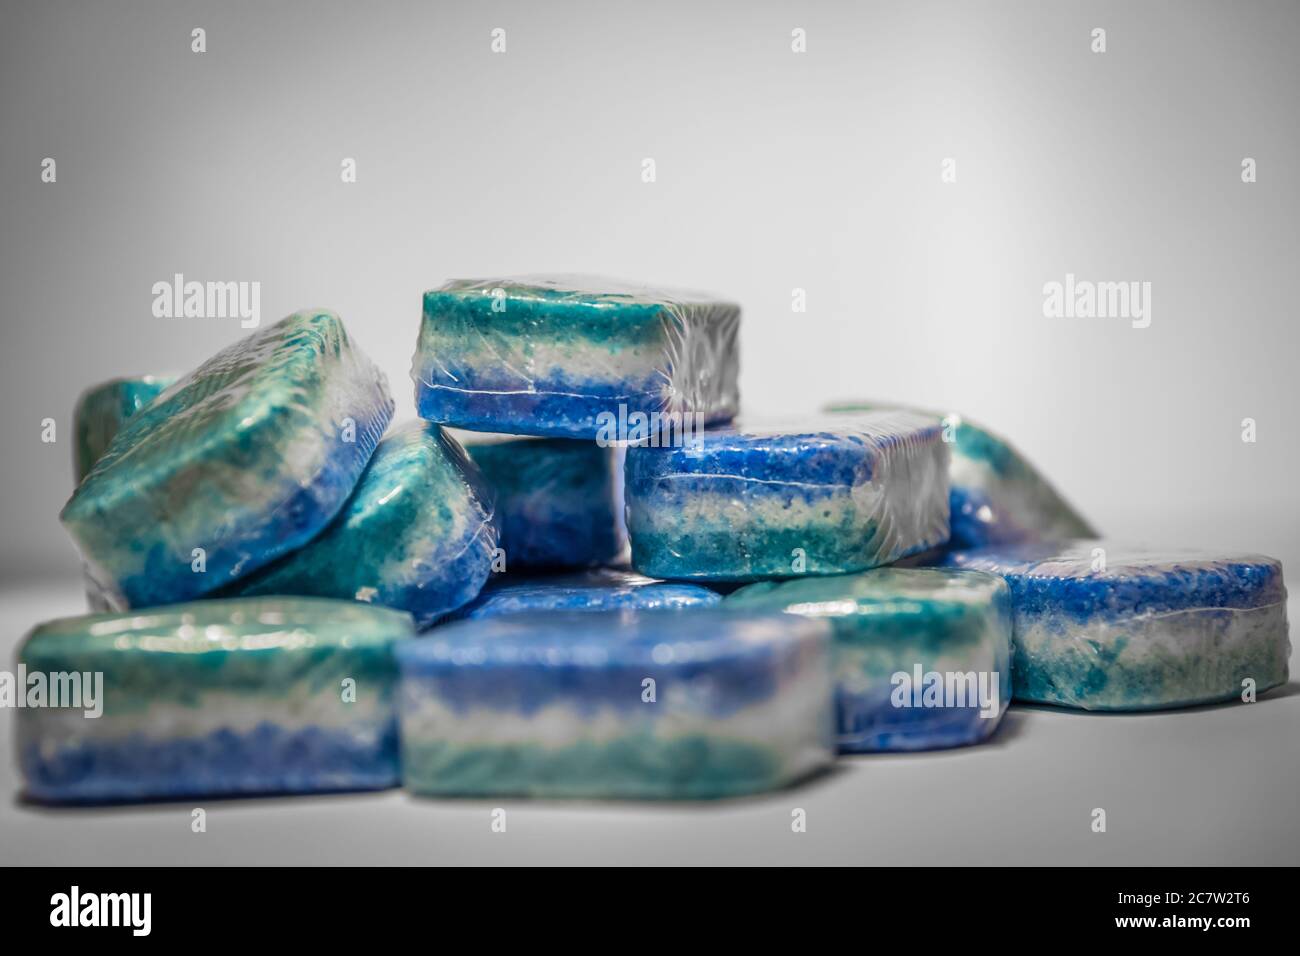 Bunch of dishwasher tablets, randomly stacked, blue, white and green colored on a white background Stock Photo